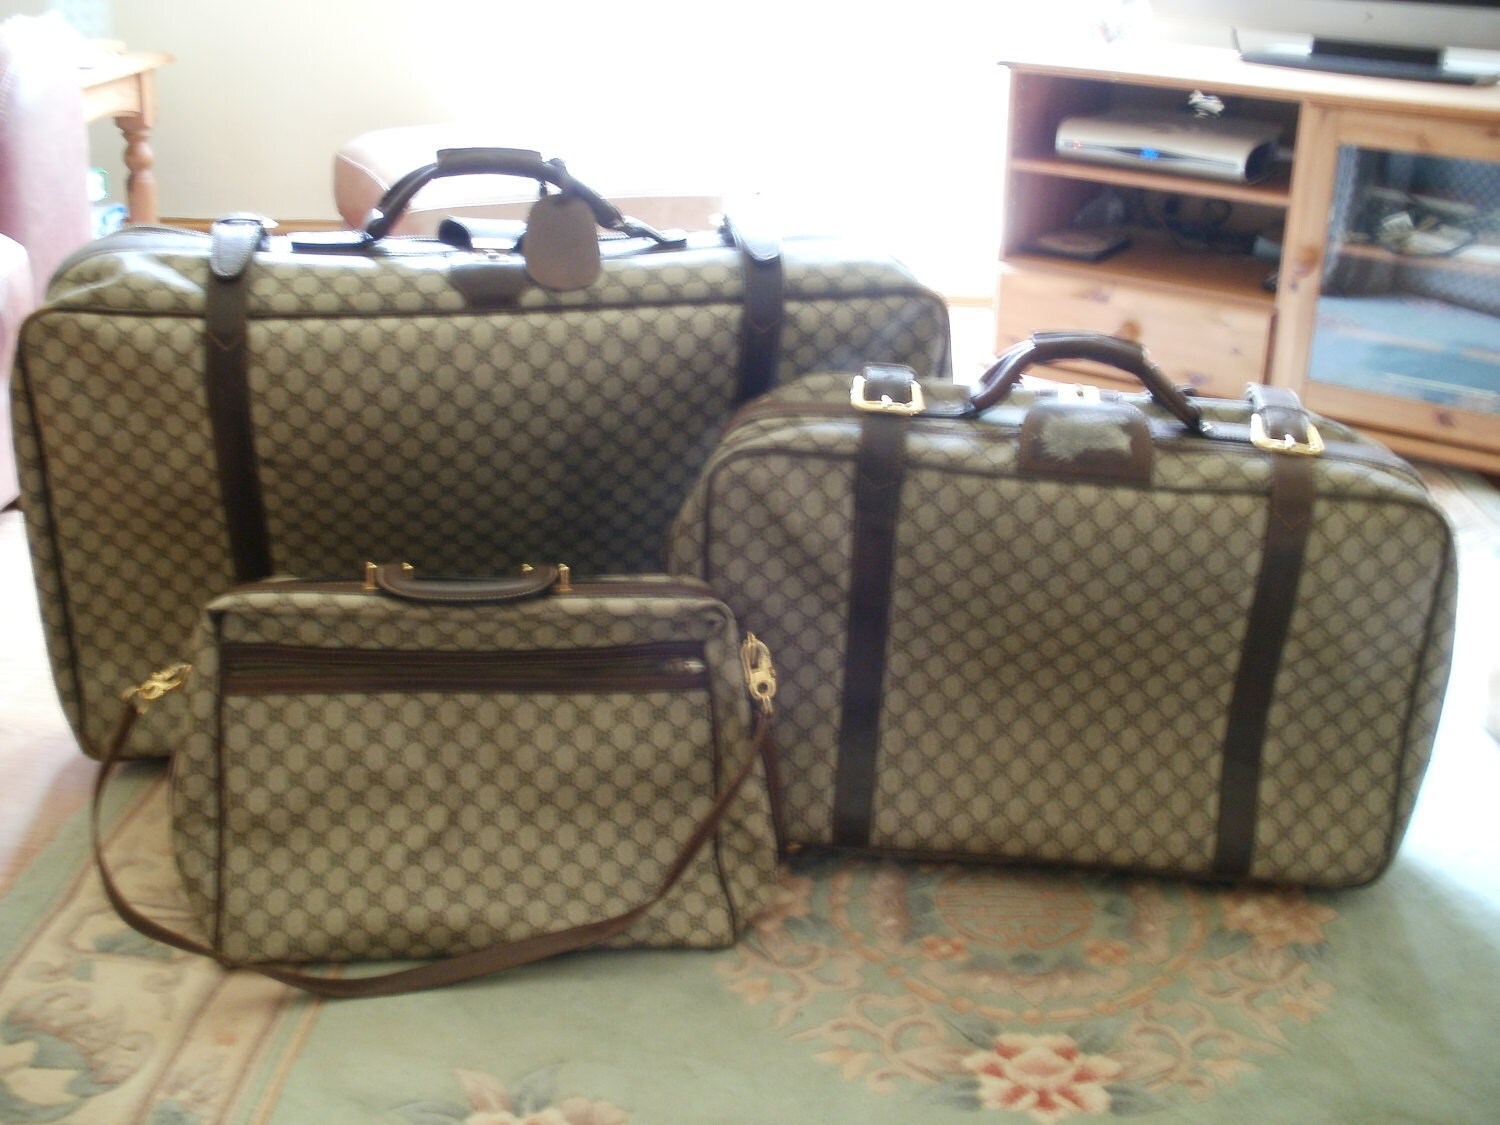 Set of 3 Gucci Suitcases in brown / cream by CraftyDeville on Etsy